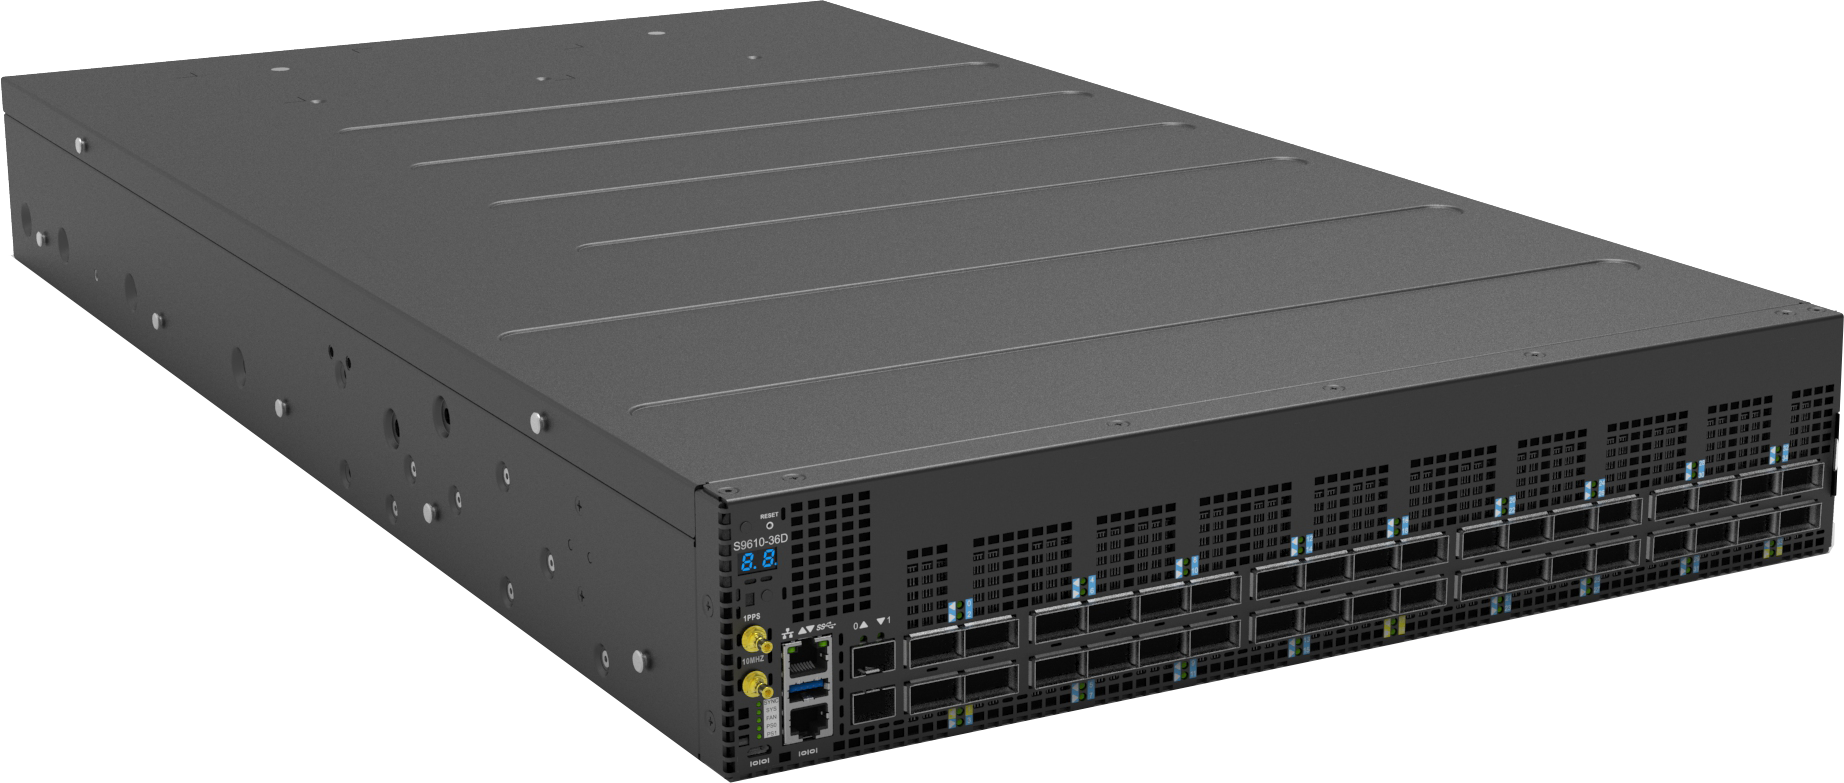 S9610-36D-open-aggregation-router-front-angle